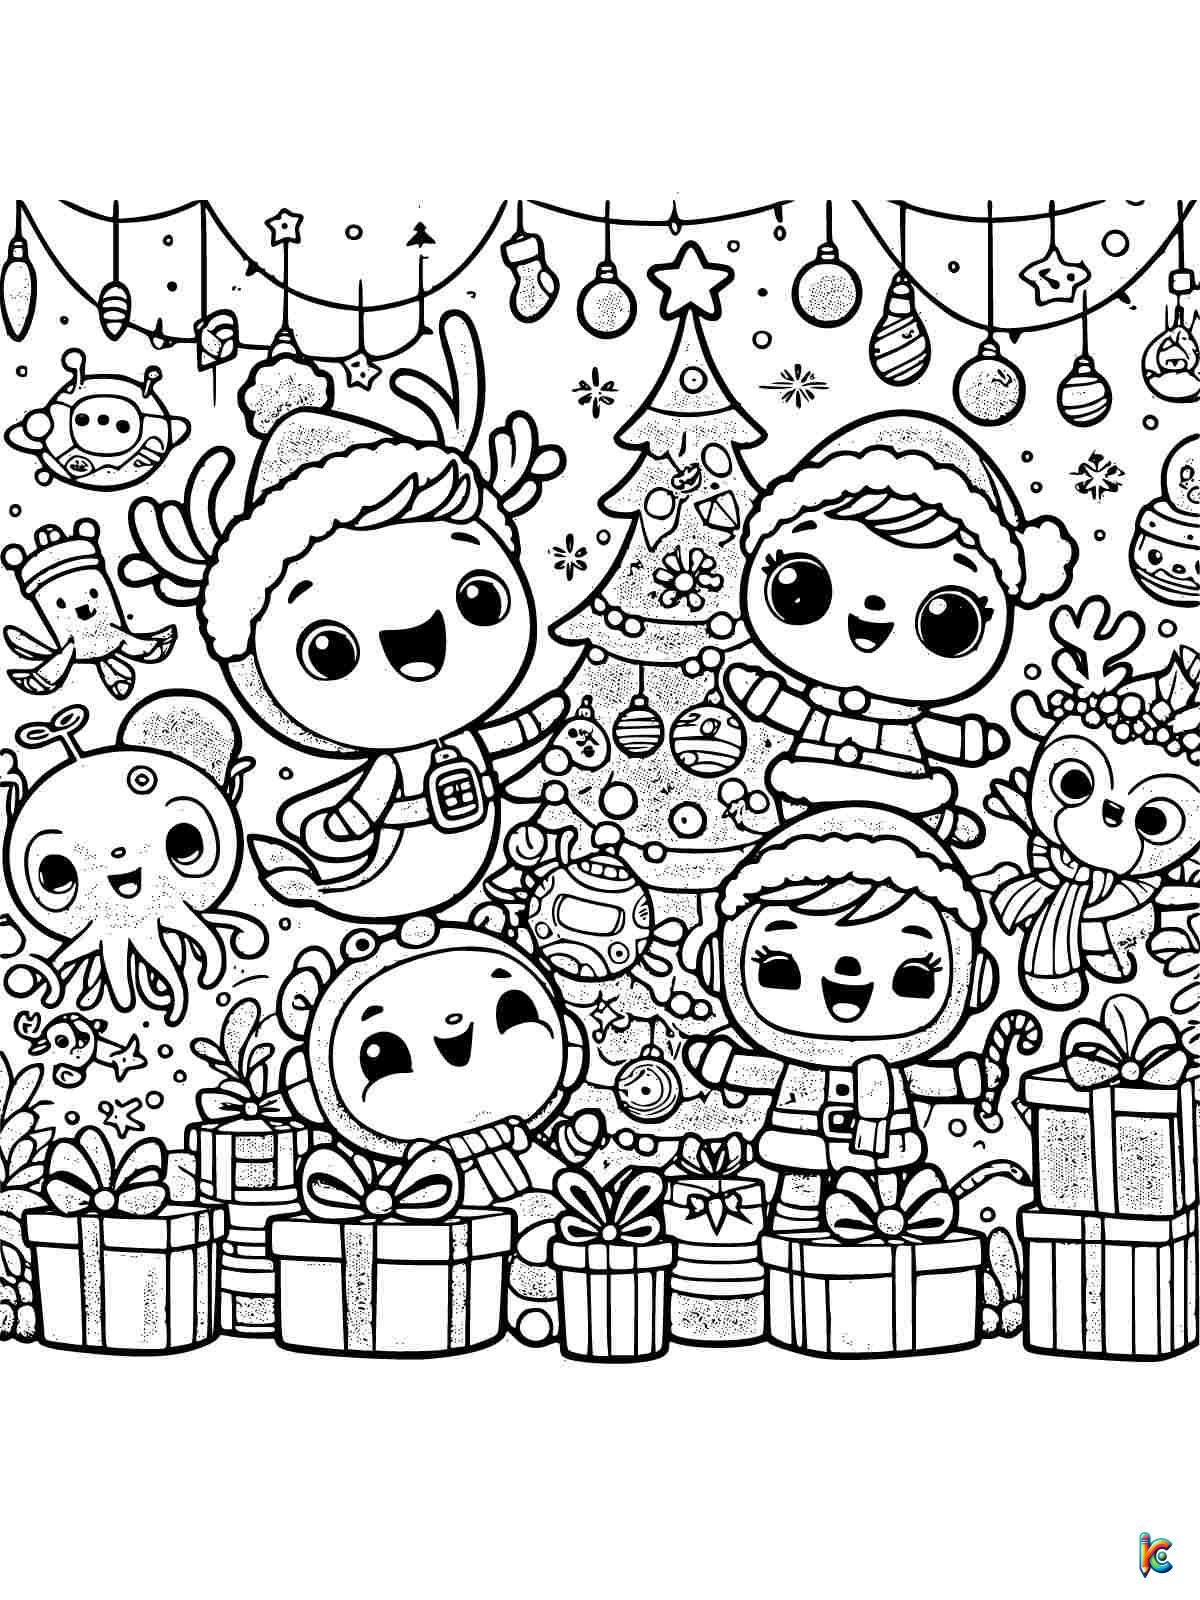 Octonauts Christmas Coloring Pages to print